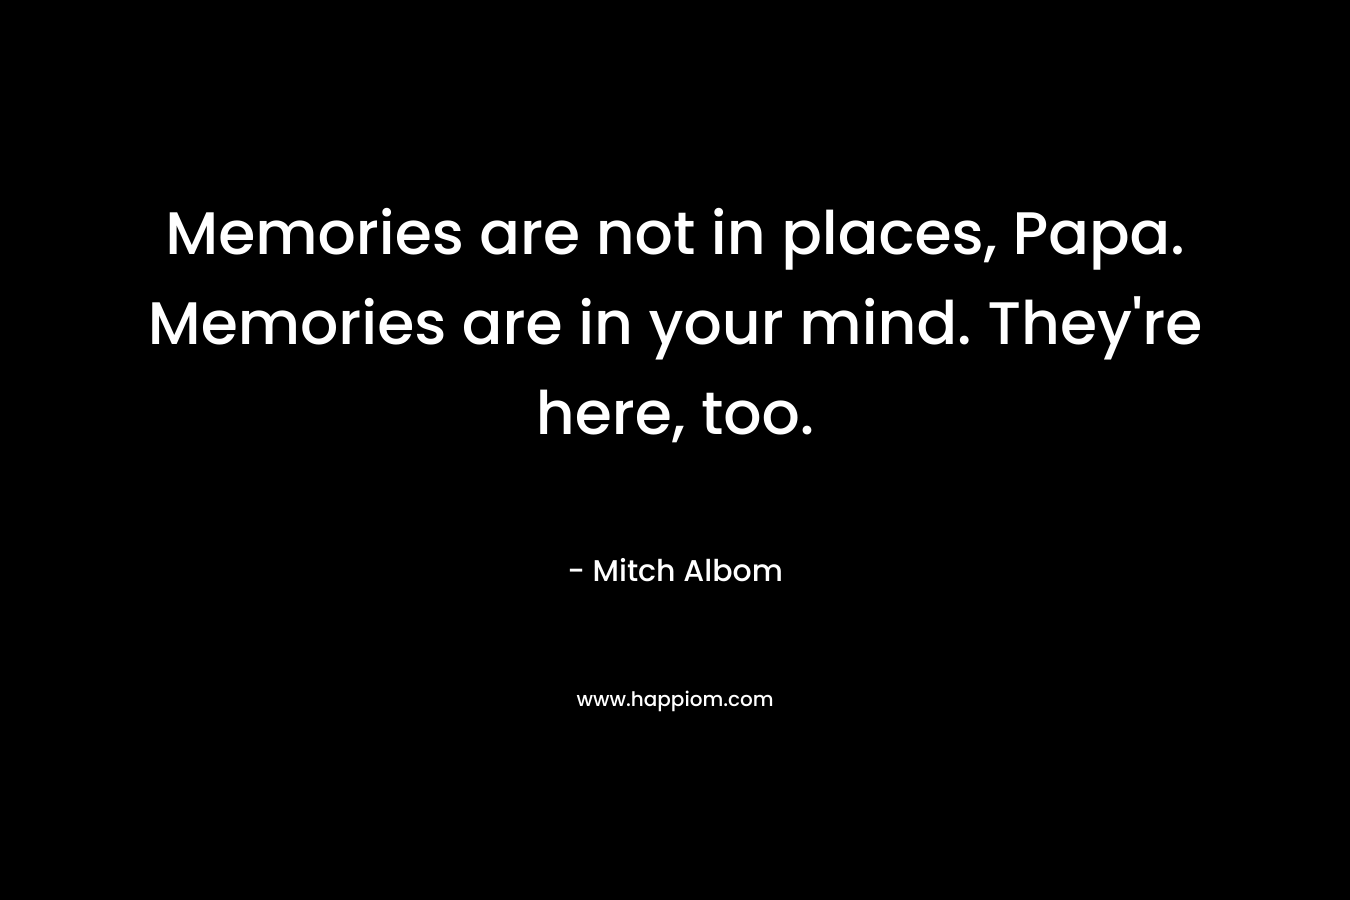 Memories are not in places, Papa. Memories are in your mind. They’re here, too. – Mitch Albom